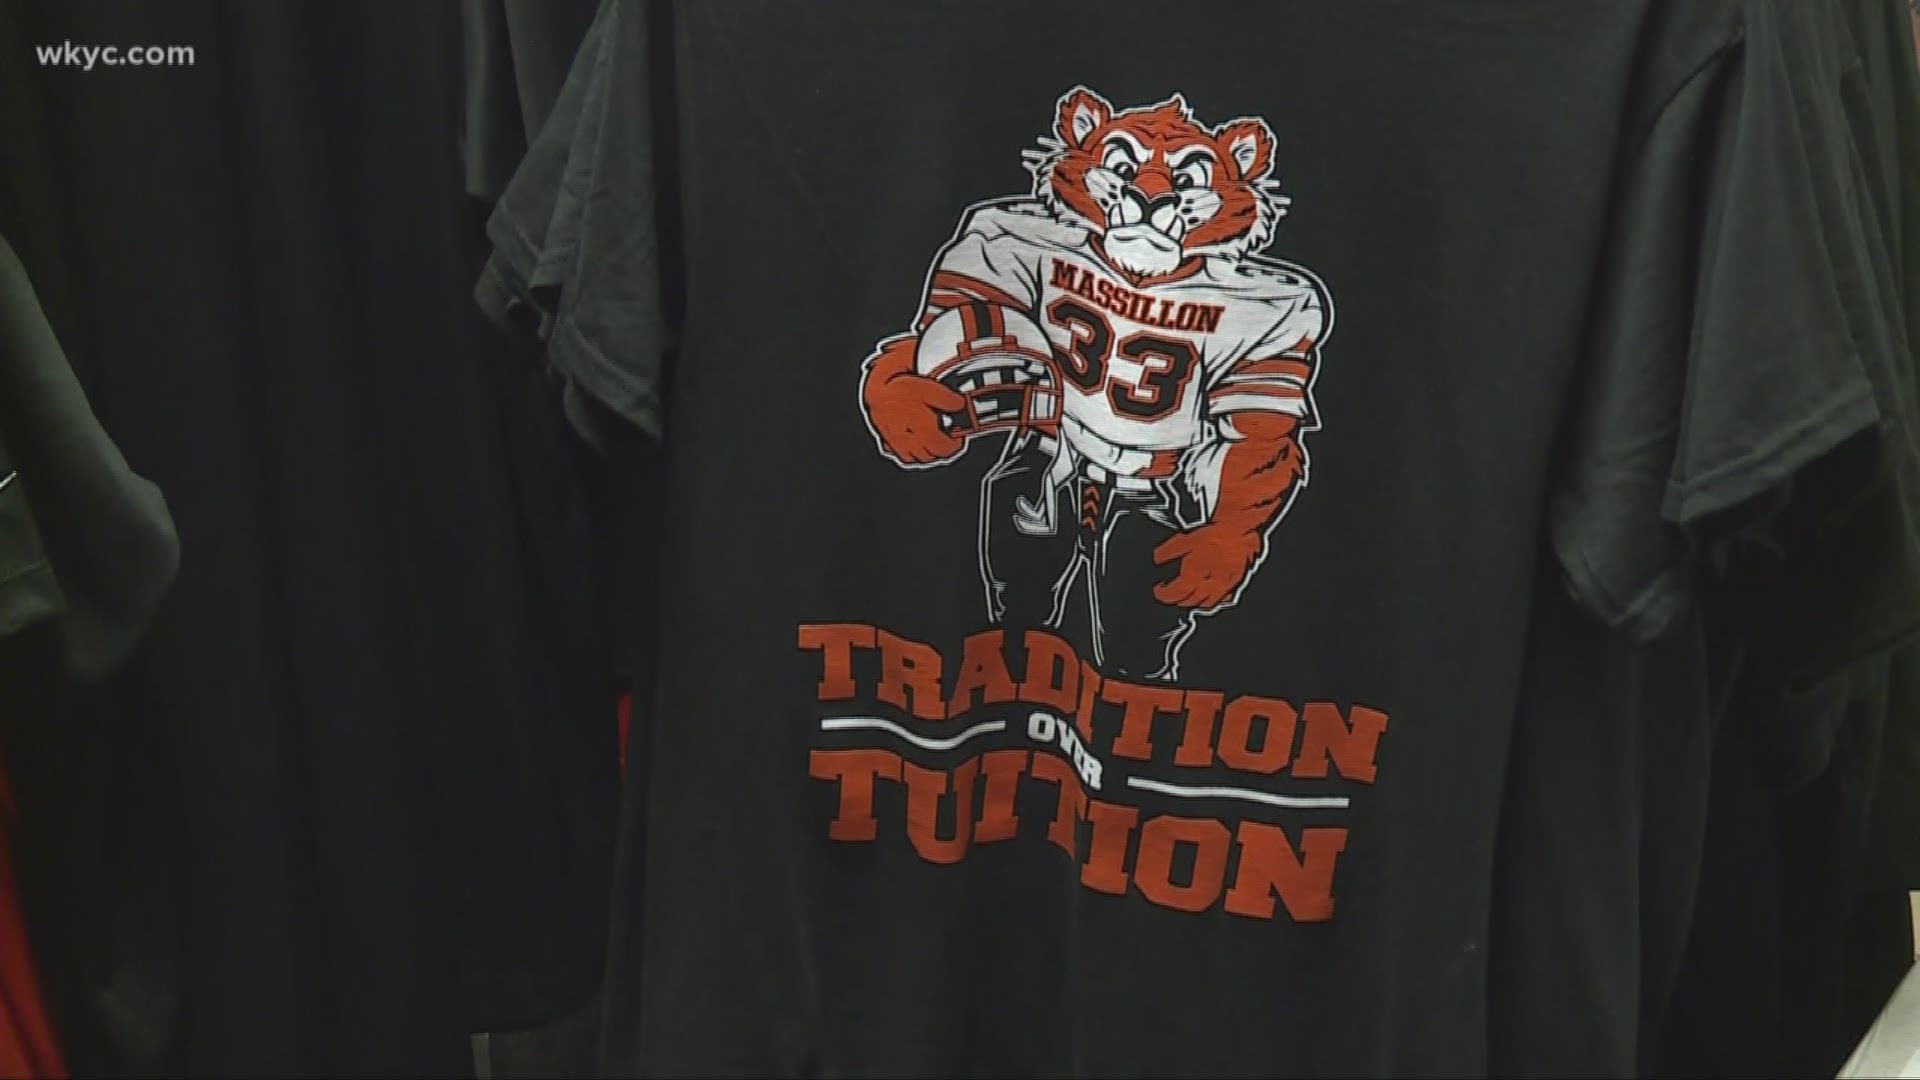 A local t-shirt compnay is cashing in on an old rivalry. However, everyone isn't happy with the products.